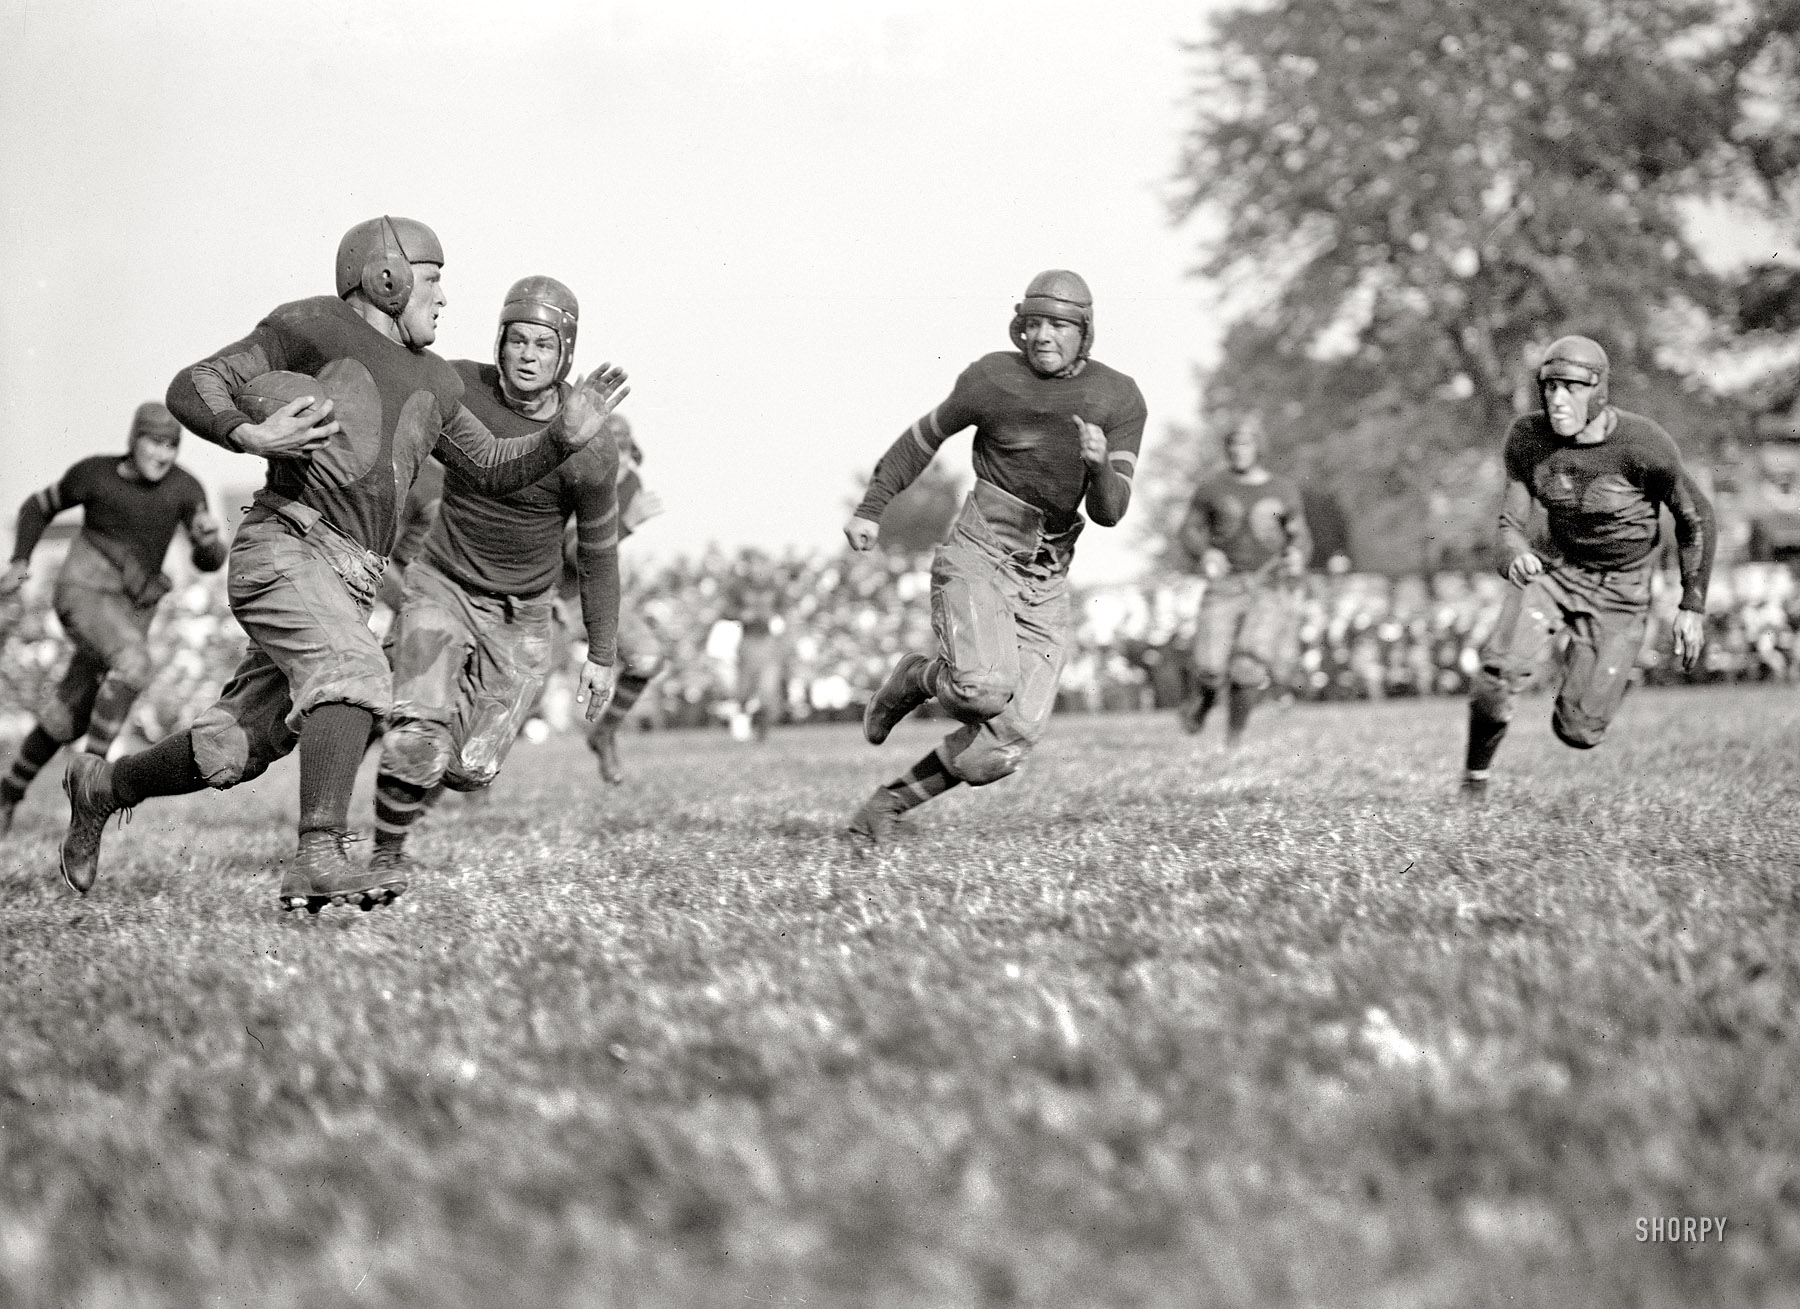 September 29, 1923. Washington, D.C. "Georgetown-G.W. game. DuFour of Georgetown carrying ball." Georgetown's Hilltoppers, with "Pug" DuFour at quarterback, prevailed over the Hatchetites (George Washington University) 20-0. National Photo Company Collection glass negative. View full size.